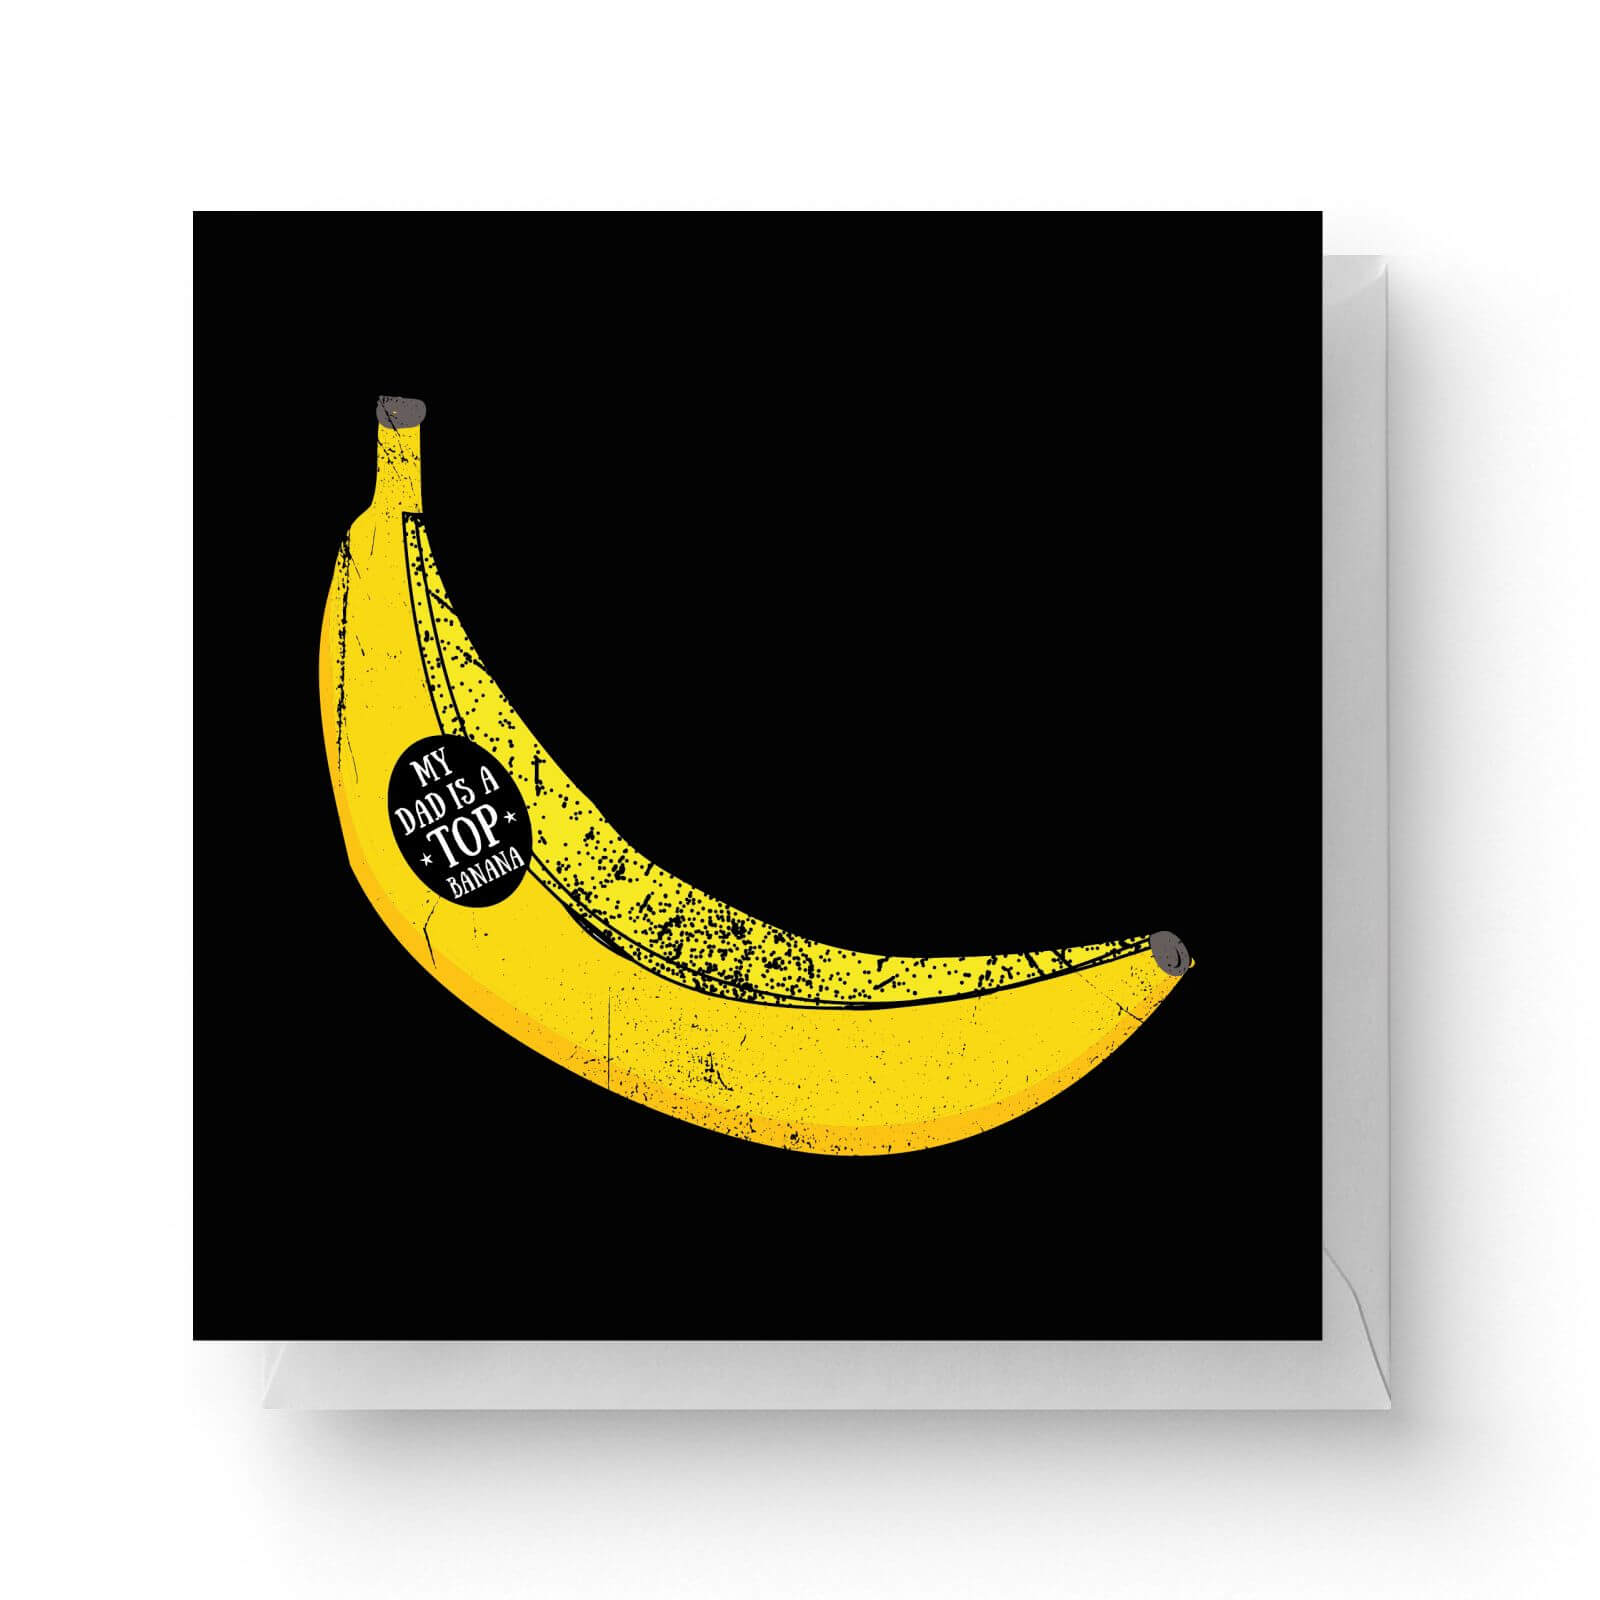 Image of My Dad Is A Top Banana Square Greetings Card (14.8cm x 14.8cm)